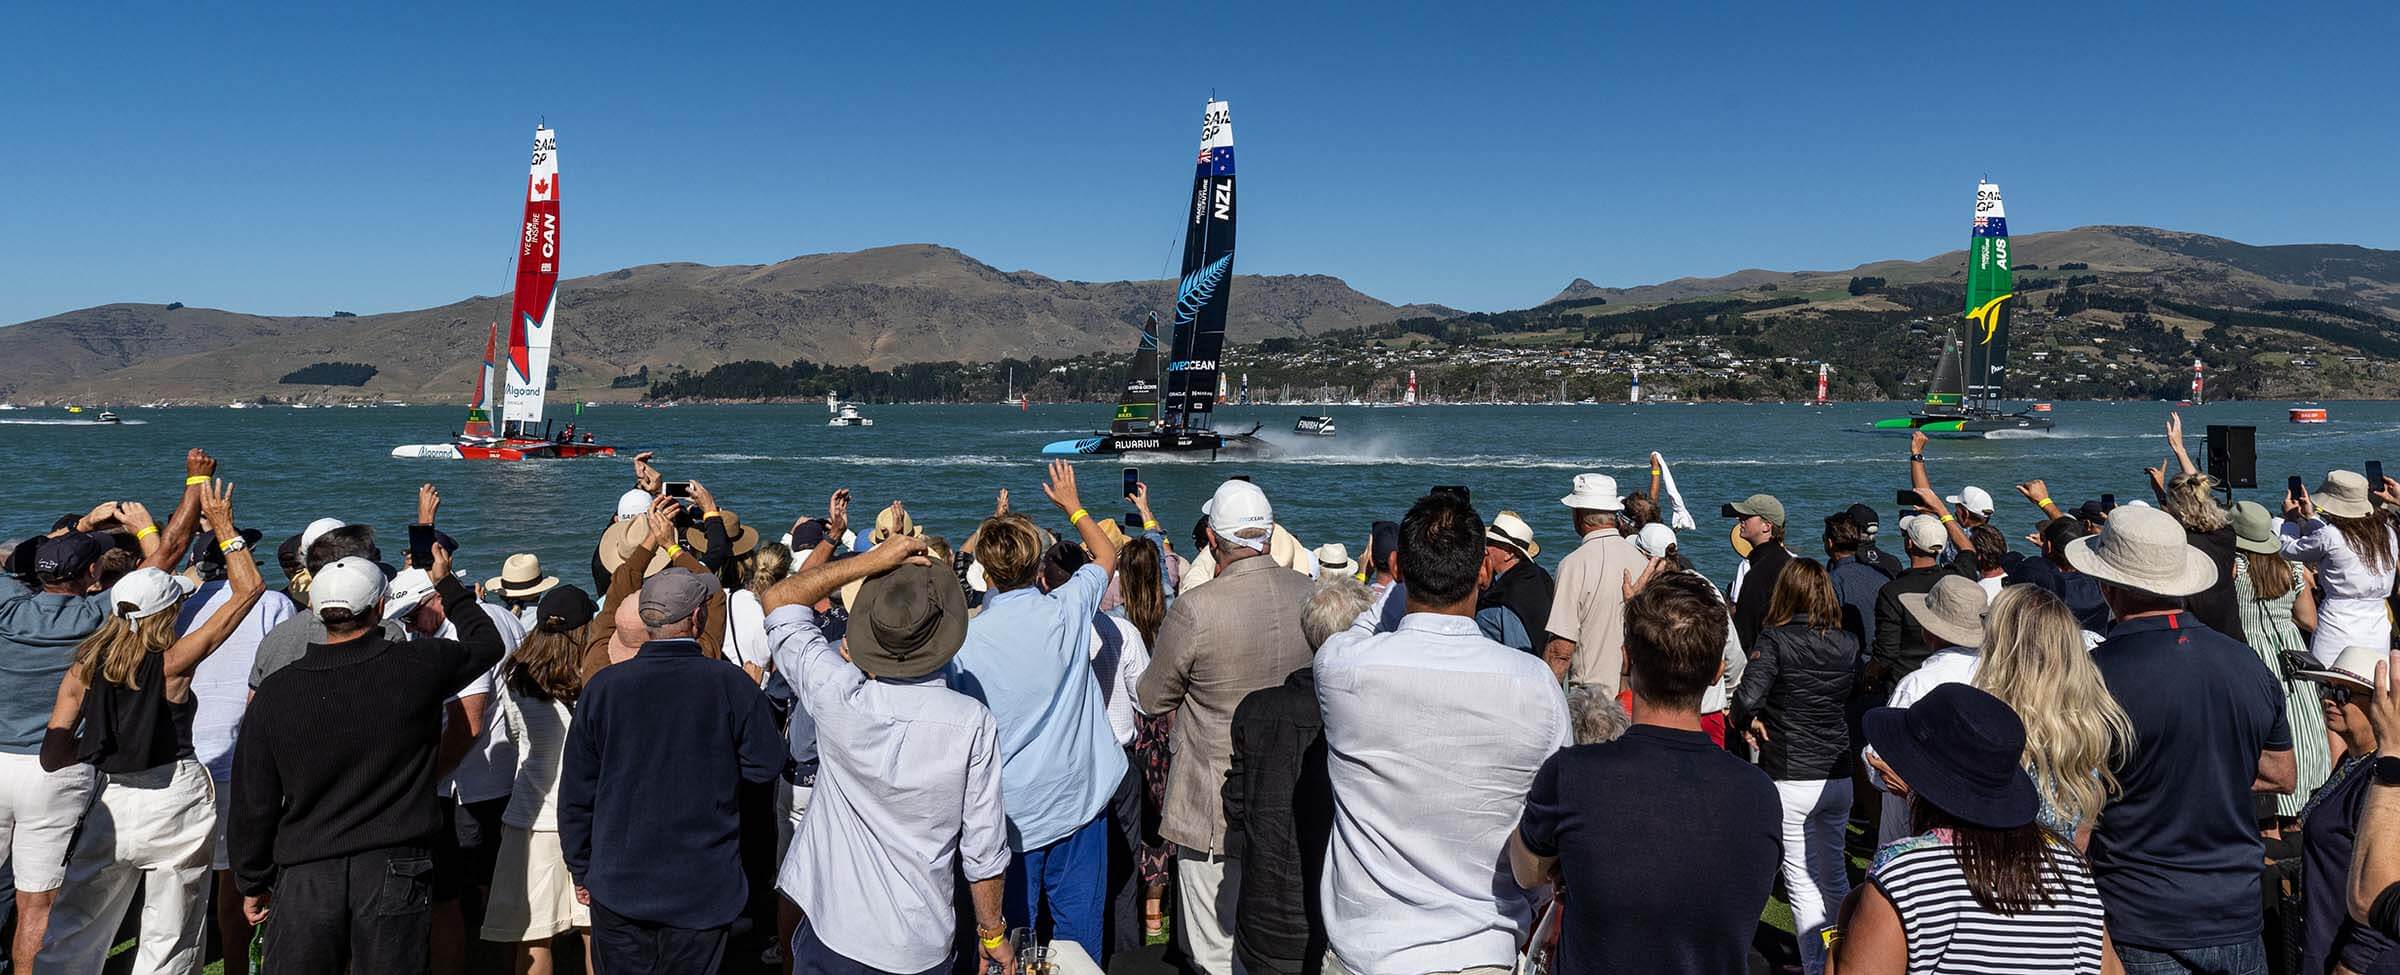 SailGP Boats Close To Crowd In Lyttelton 2023